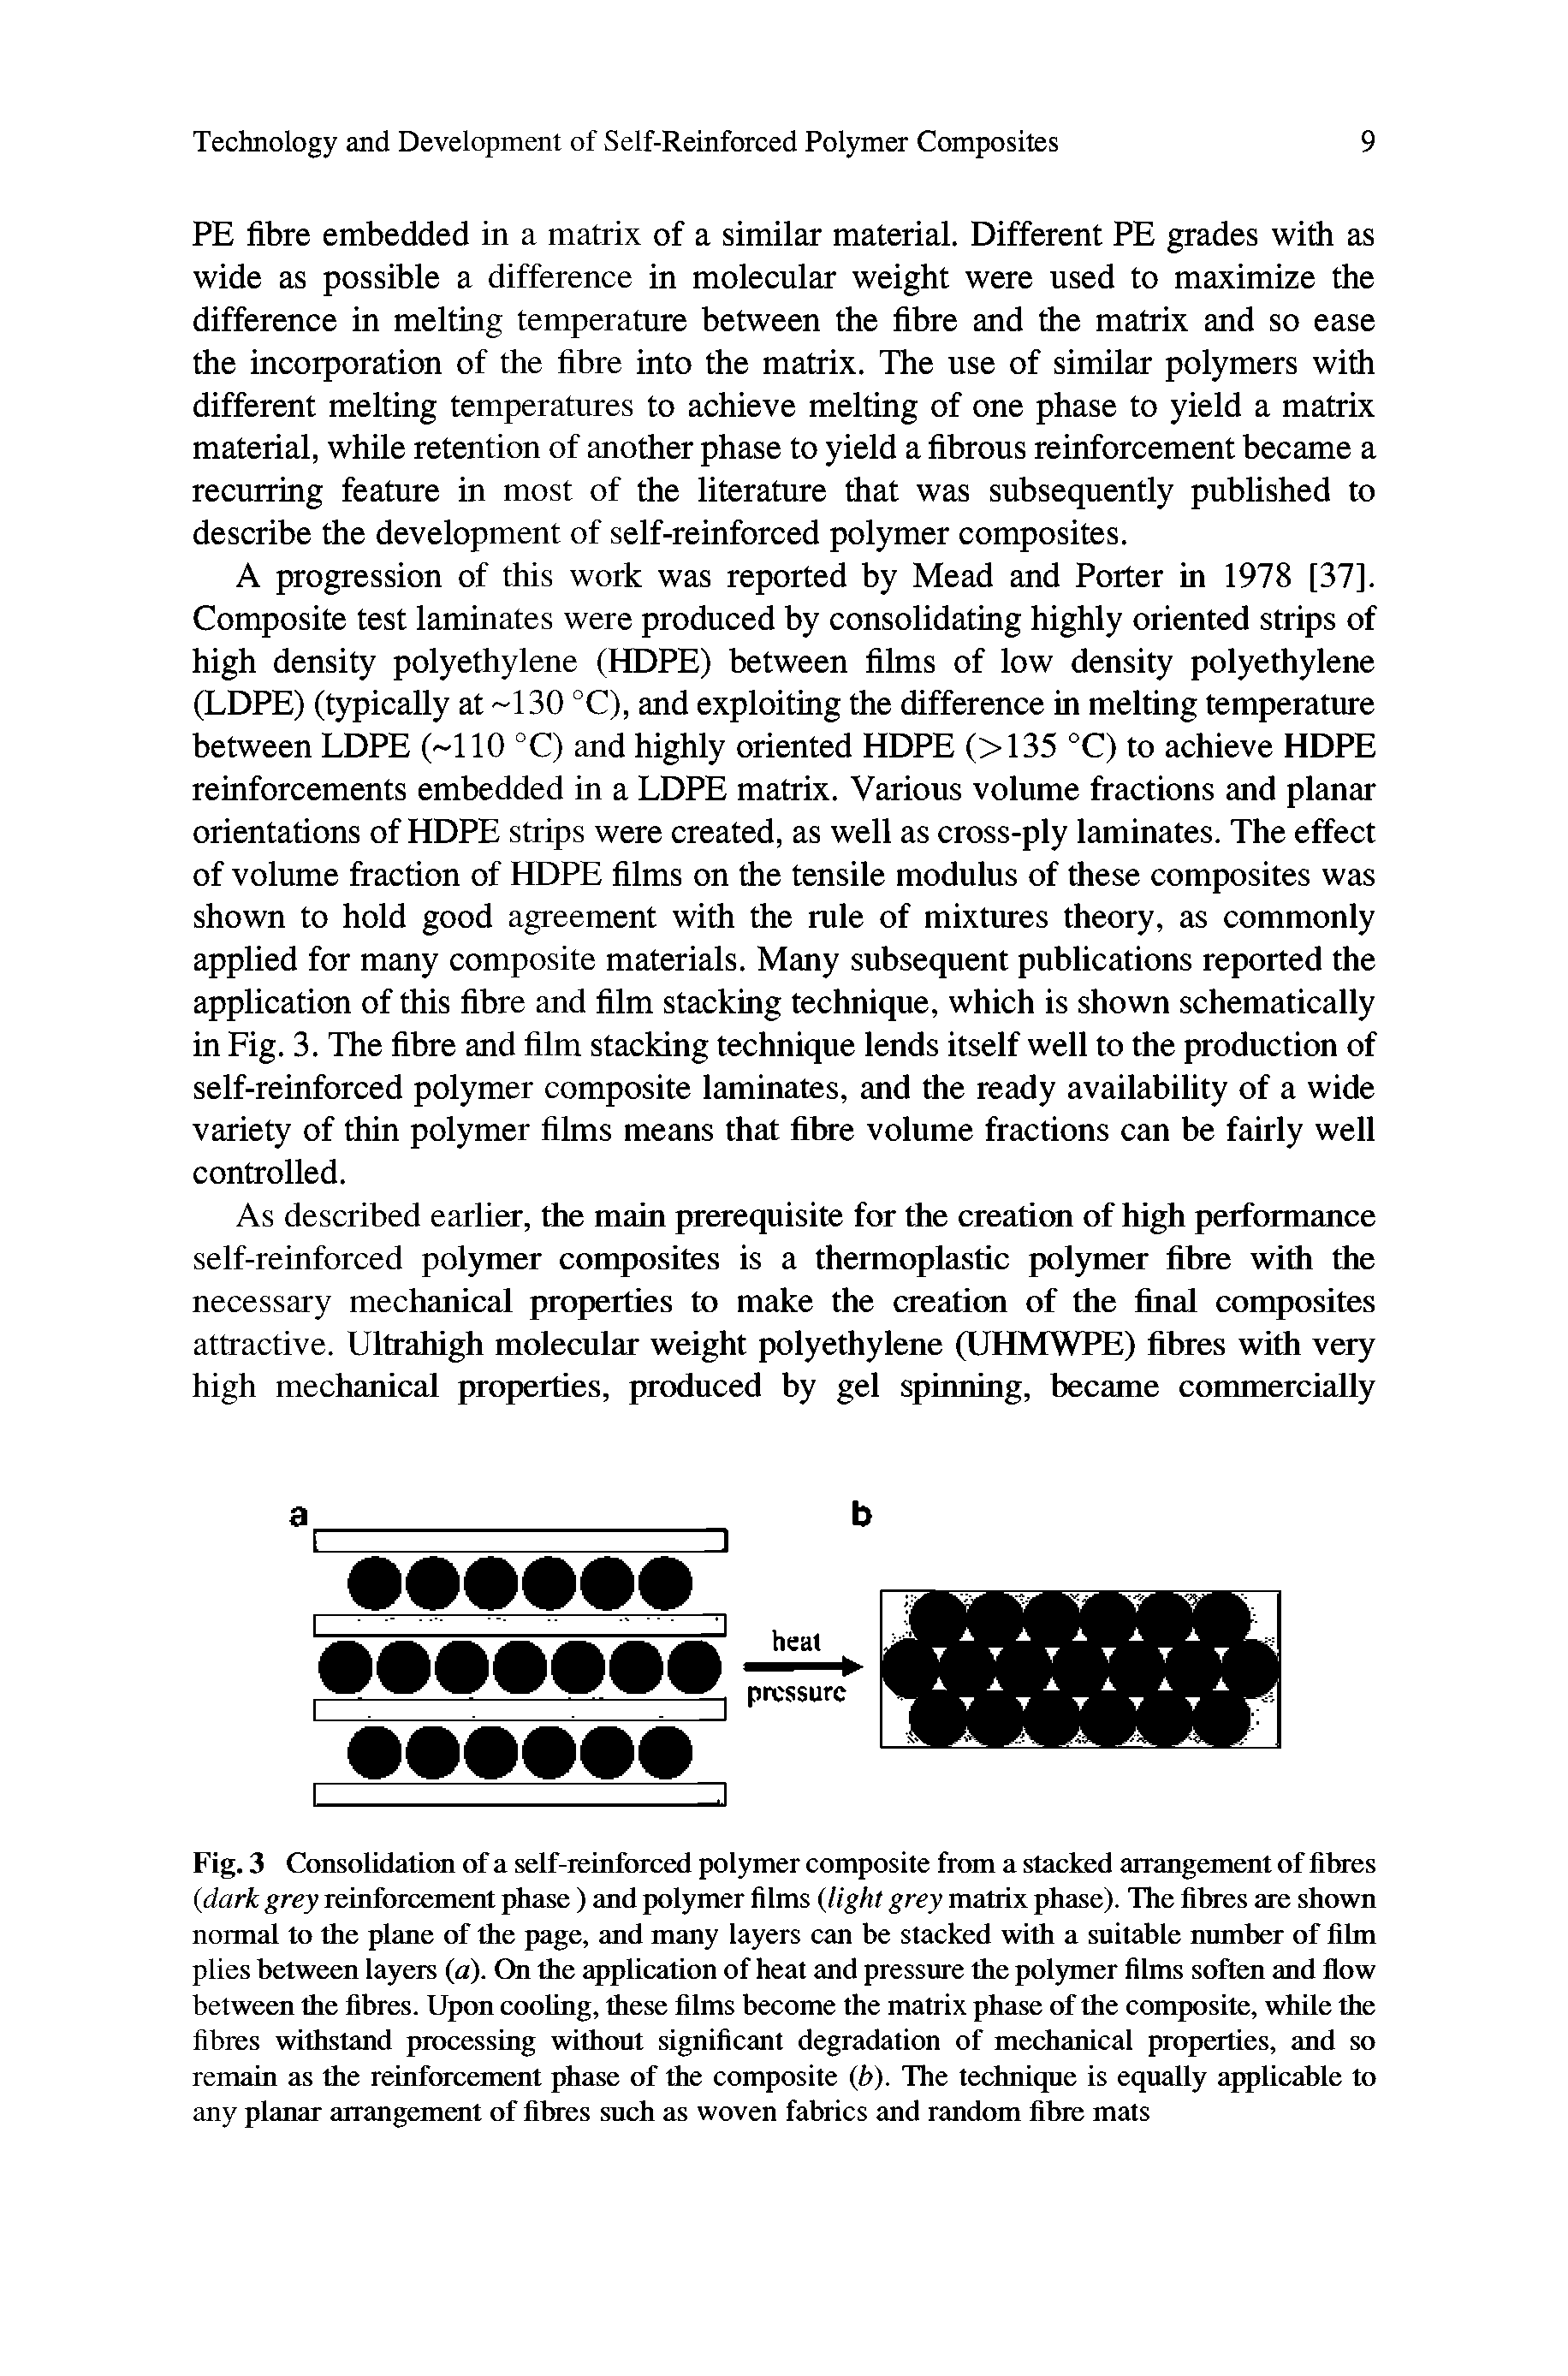 Fig. 3 Consolidation of a self-reinforced polymer composite from a stacked arrangement of fibres dark grey reinforcement phase) and polymer films light grey matrix phase). The fibres are shown normal to the plane of the page, and many layers can be stacked with a suitable number of film plies between layers a). On the application of heat and pressure the polymer films soften and flow between the fibres. Upon cooling, these films become the matrix phase of the composite, while the fibres withstand processing without significant degradation of mechanical properties, and so remain as the reinforcement phase of the composite b). The technique is equally applicable to any planar arrangement of fibres such as woven fabrics and random fibre mats...